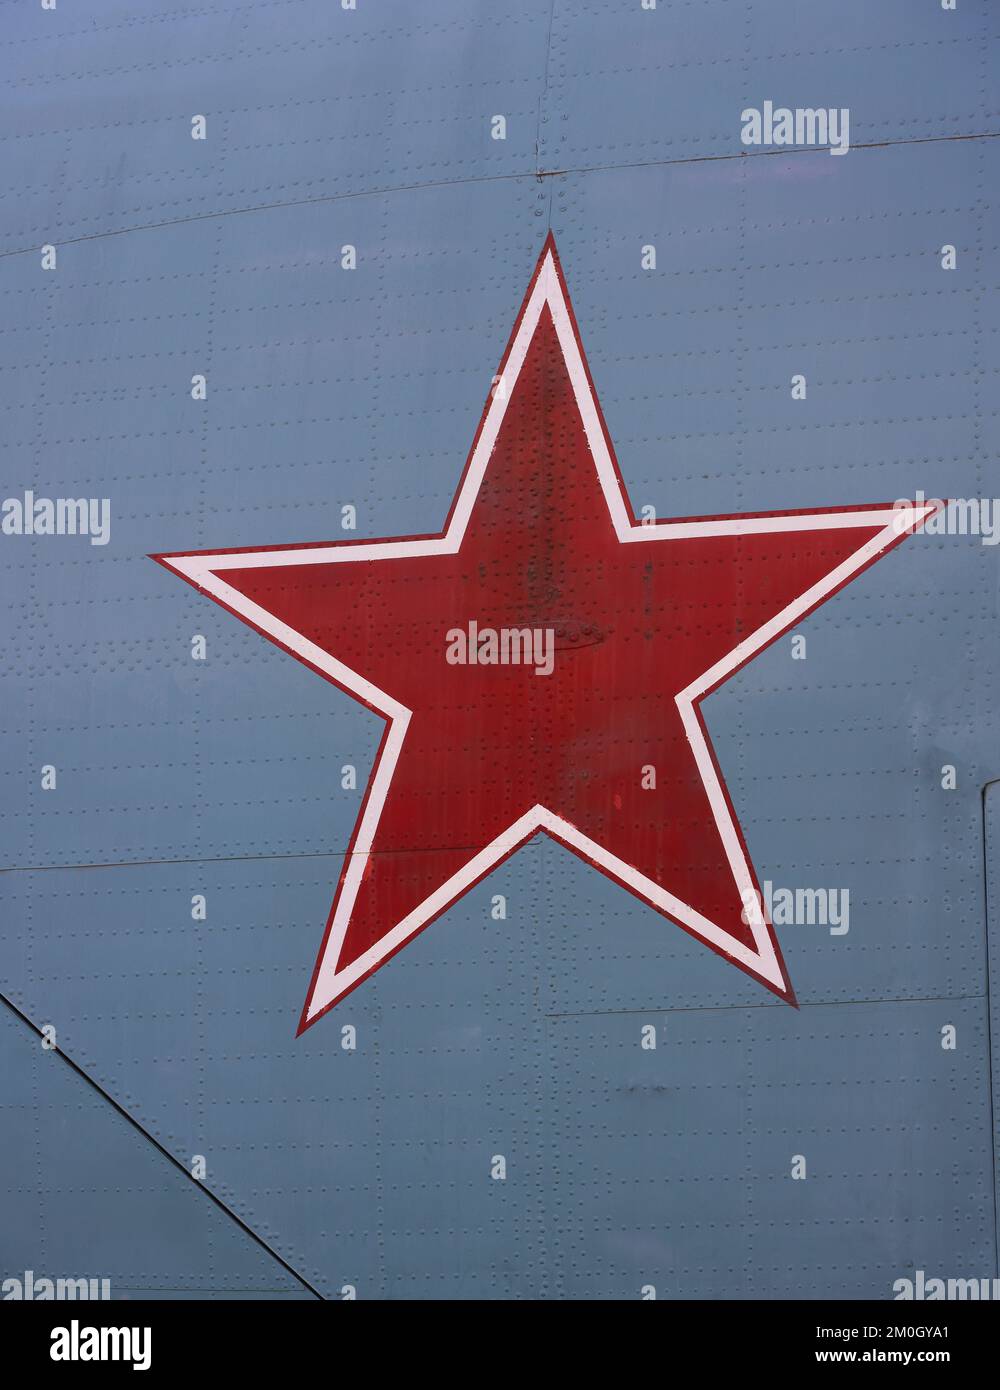 Close up Soviet Union or Russian red star symbol painted on vintage military fighter aircraft studded metal surface Stock Photo